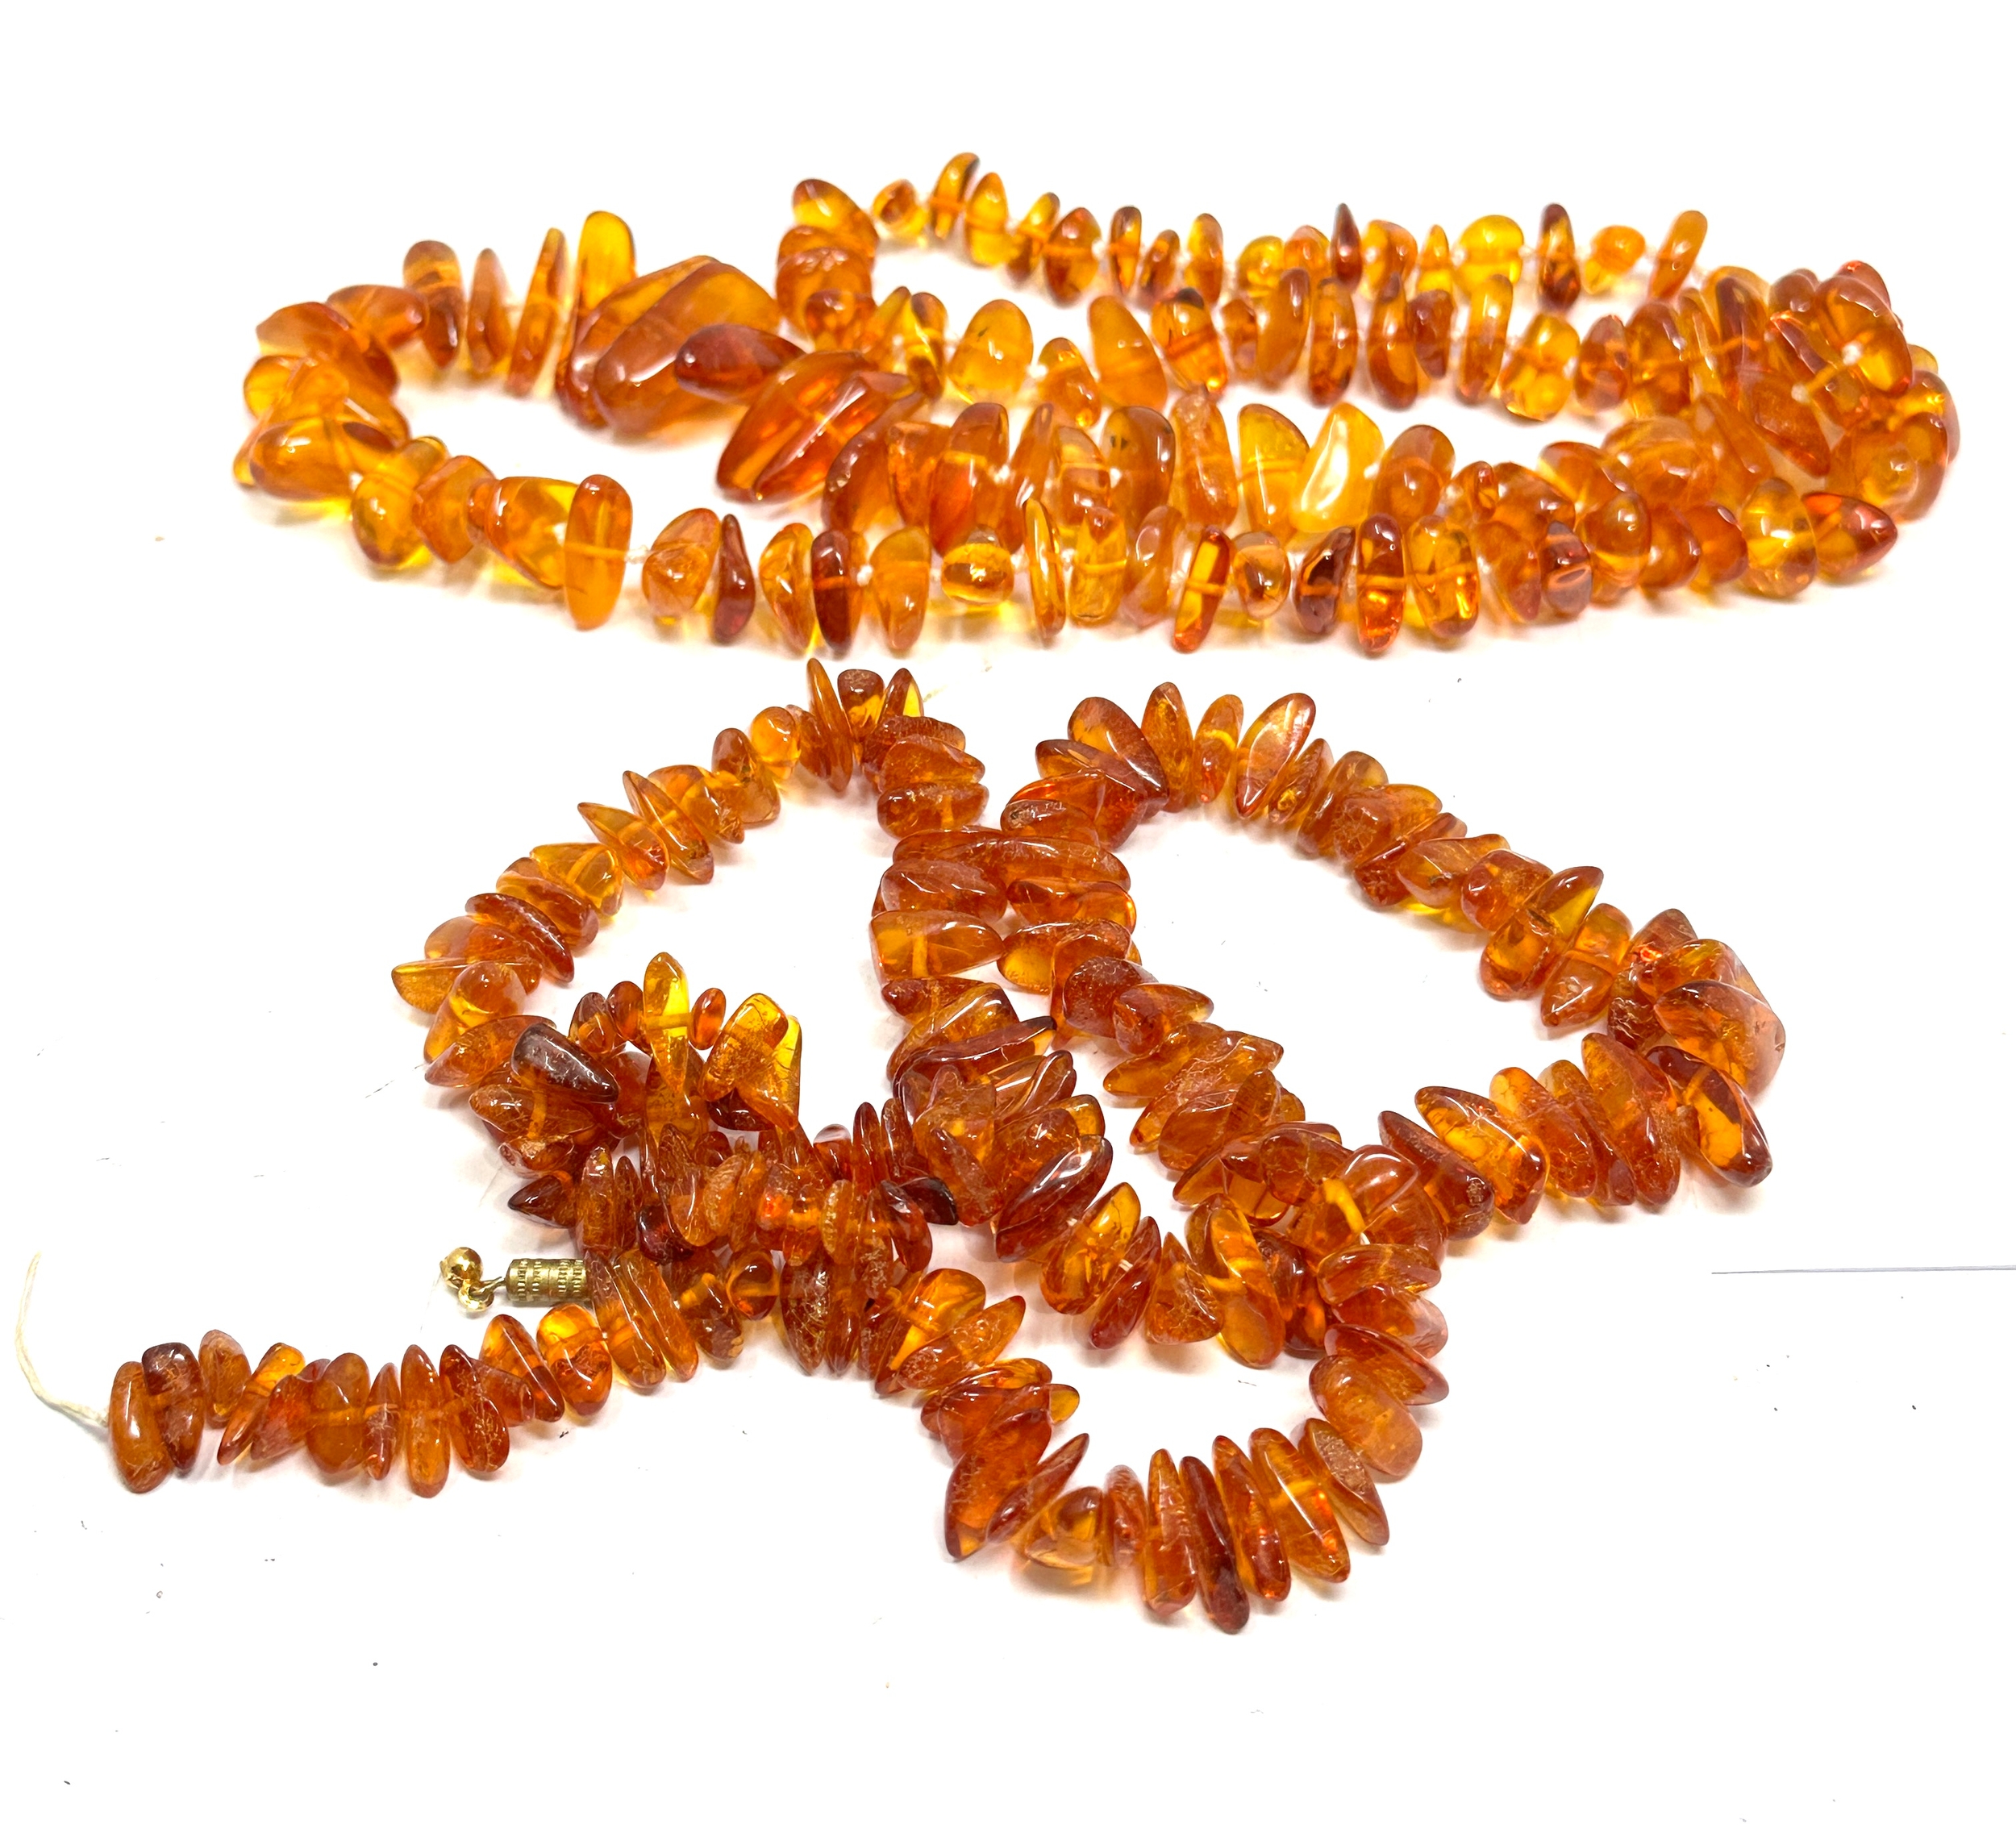 Amber jewellery necklaces weight 113g